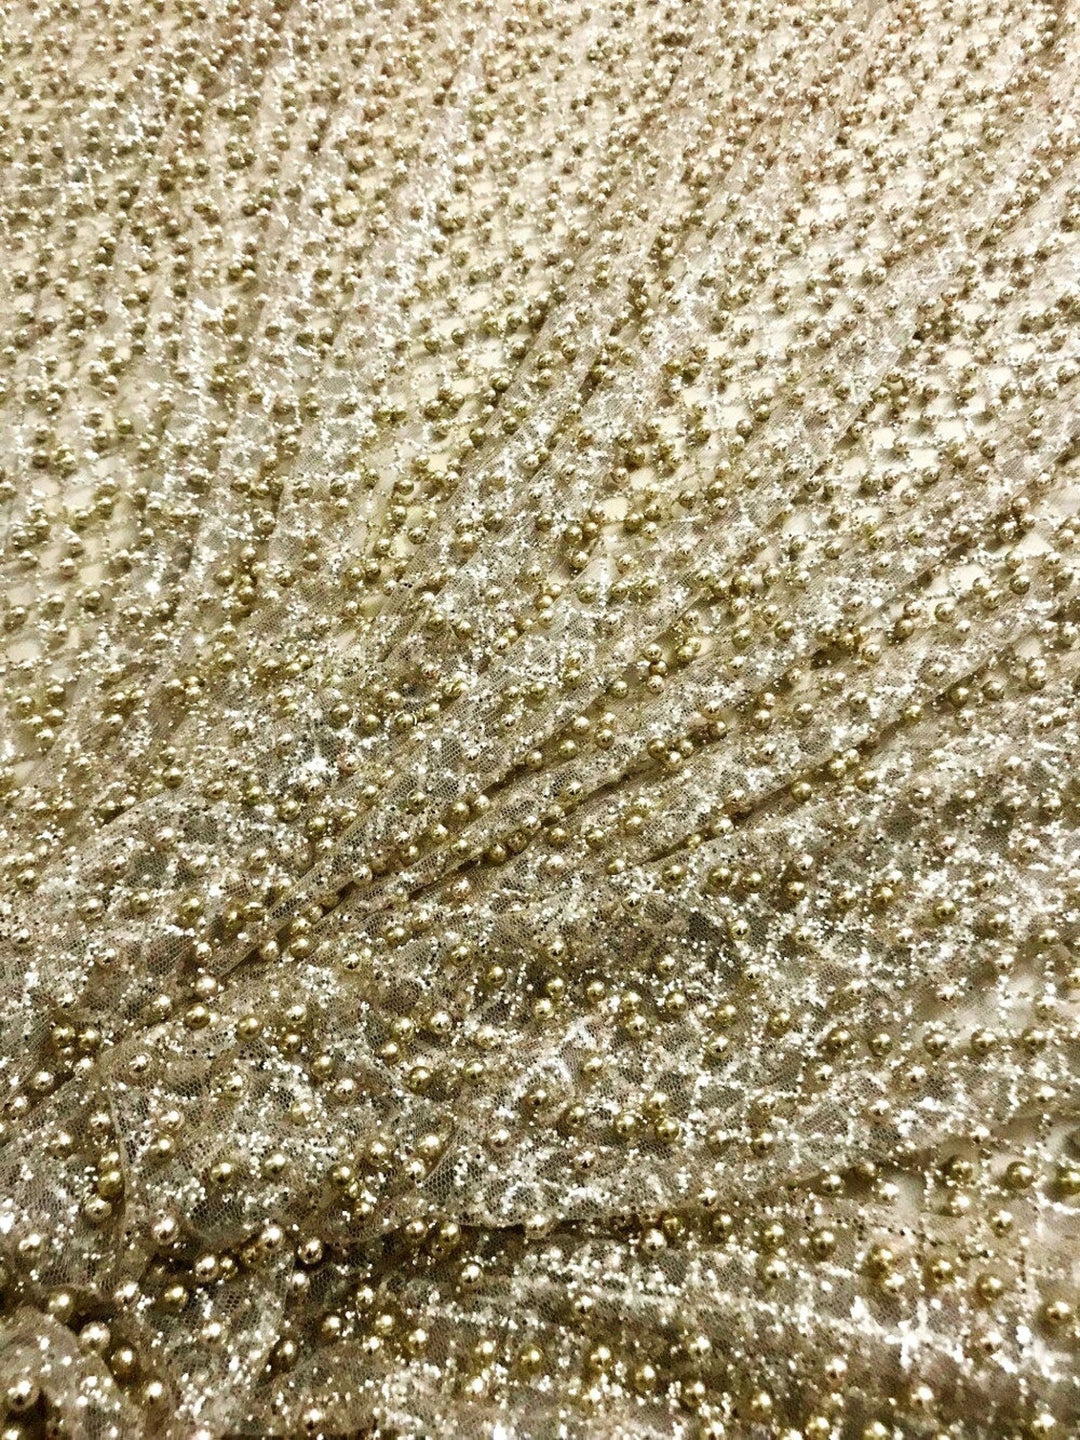 5 YARDS / Overall Gold Beads Metallic Gold Glitter Embroidery Mesh Lace / Dress Fabric - Classic & Modern